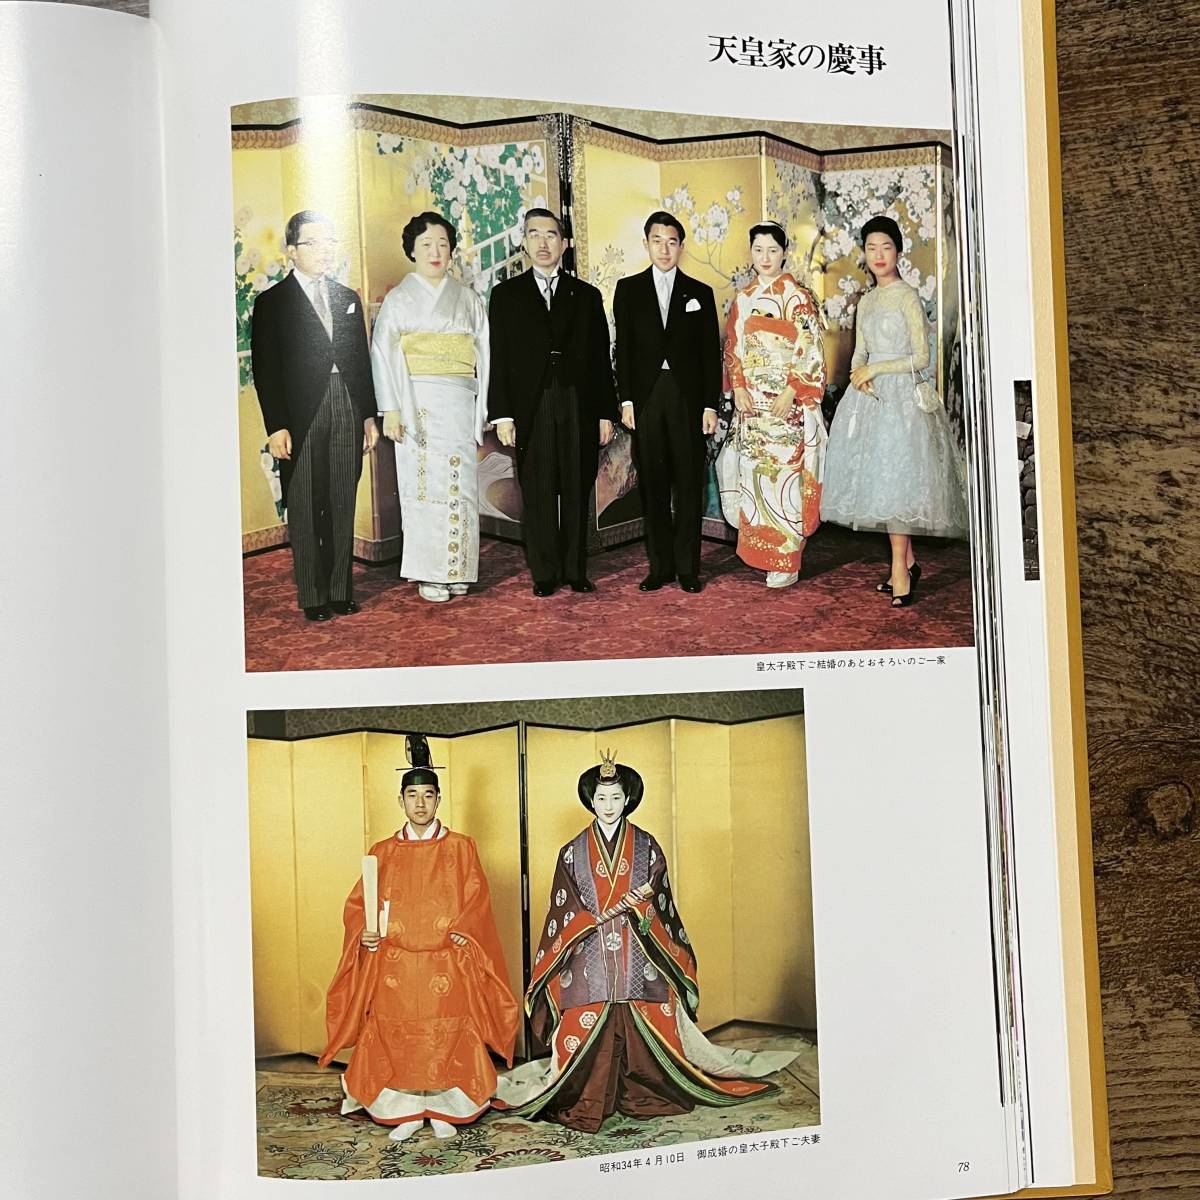 J-2141# Showa era. heaven .. under special photoalbum # Imperial Family # every day newspaper company #1989 year 1 month 30 day no. 2.